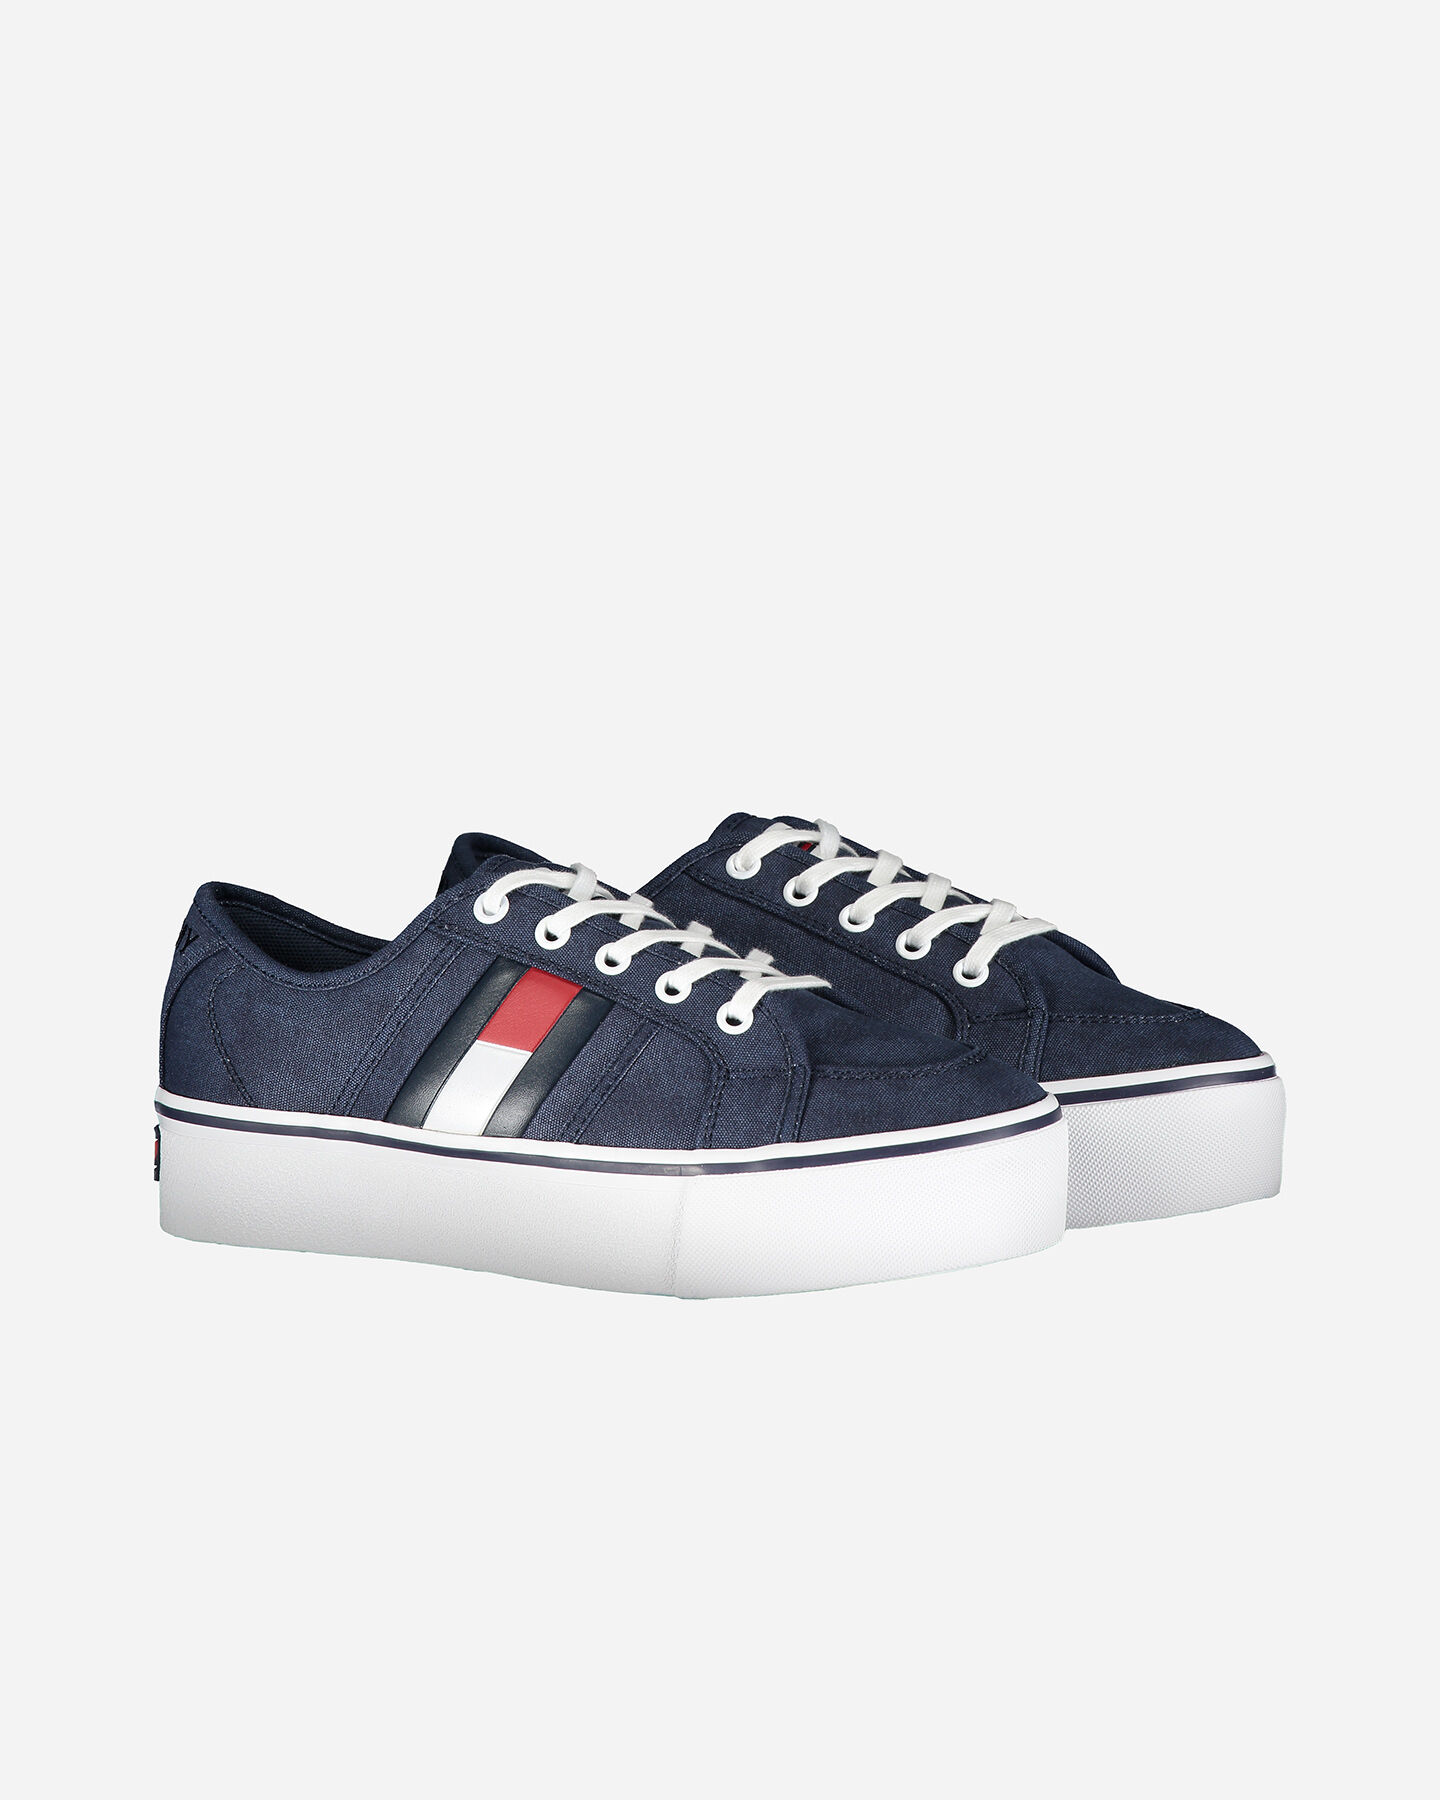  Scarpe sneakers TOMMY HILFIGER FLAG W S4080157|C87|36 scatto 1